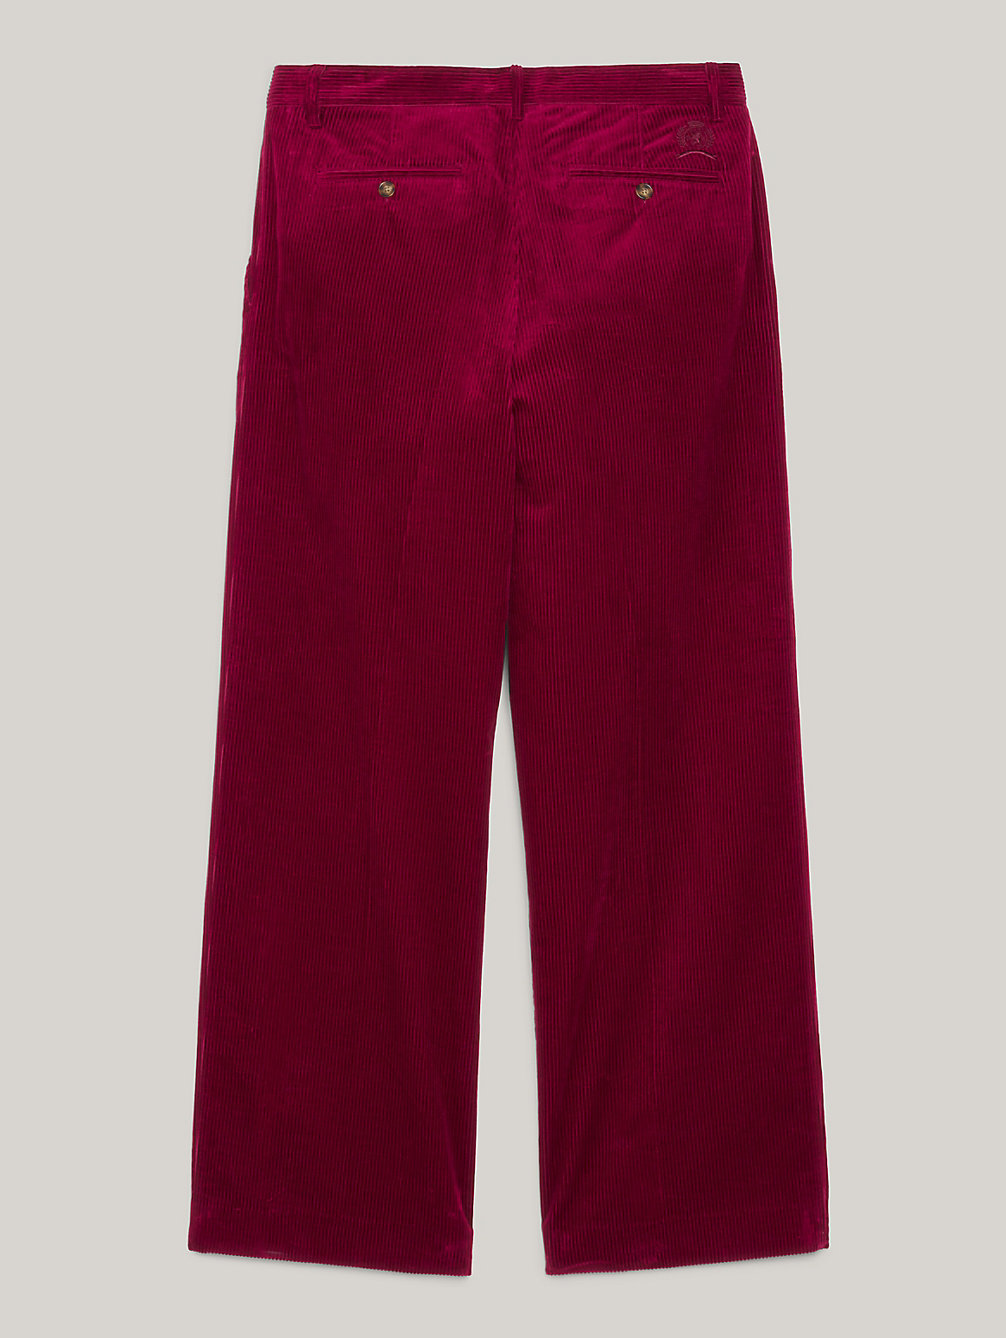 red crest relaxed fit corduroy chinos for men tommy hilfiger